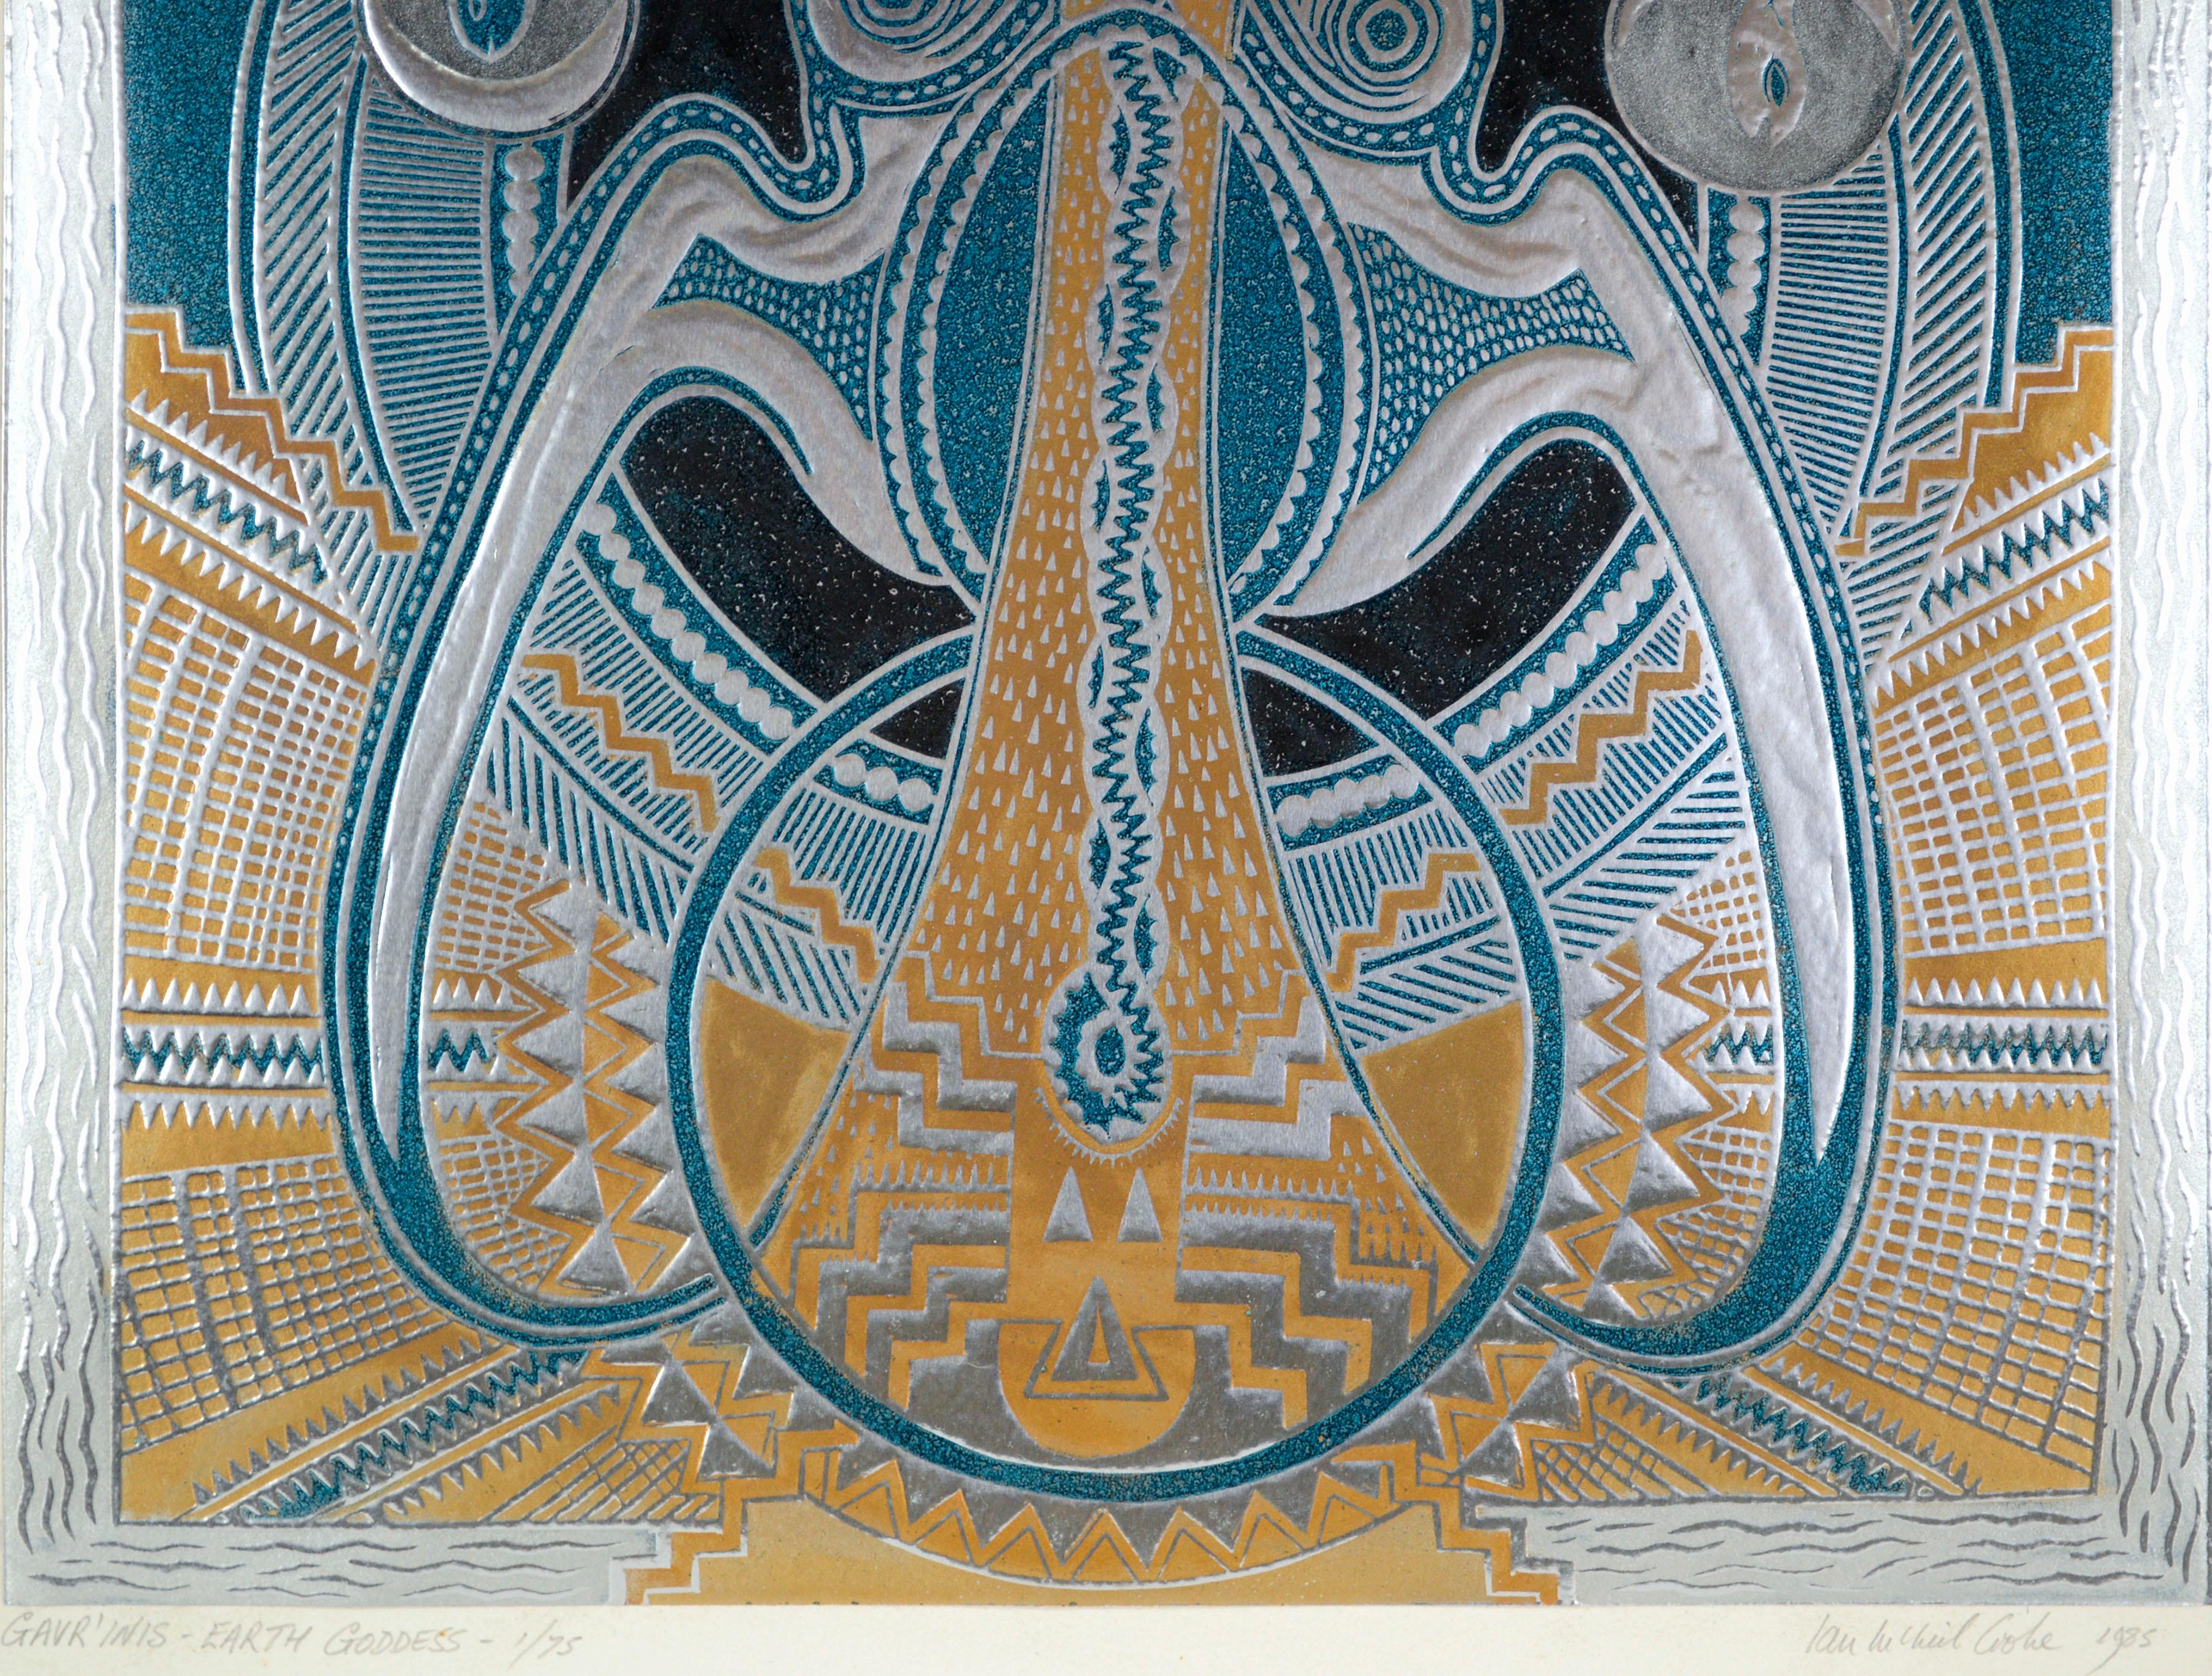 A dazzling visionary art print with psychedelic patterned imagery in metallic silver, blue, and yellow by Ian McNeil Cooke (British, b.1937), 1985. This detailed limited edition signed print depicts a stylized Earth Goddess inspired by the Neolithic